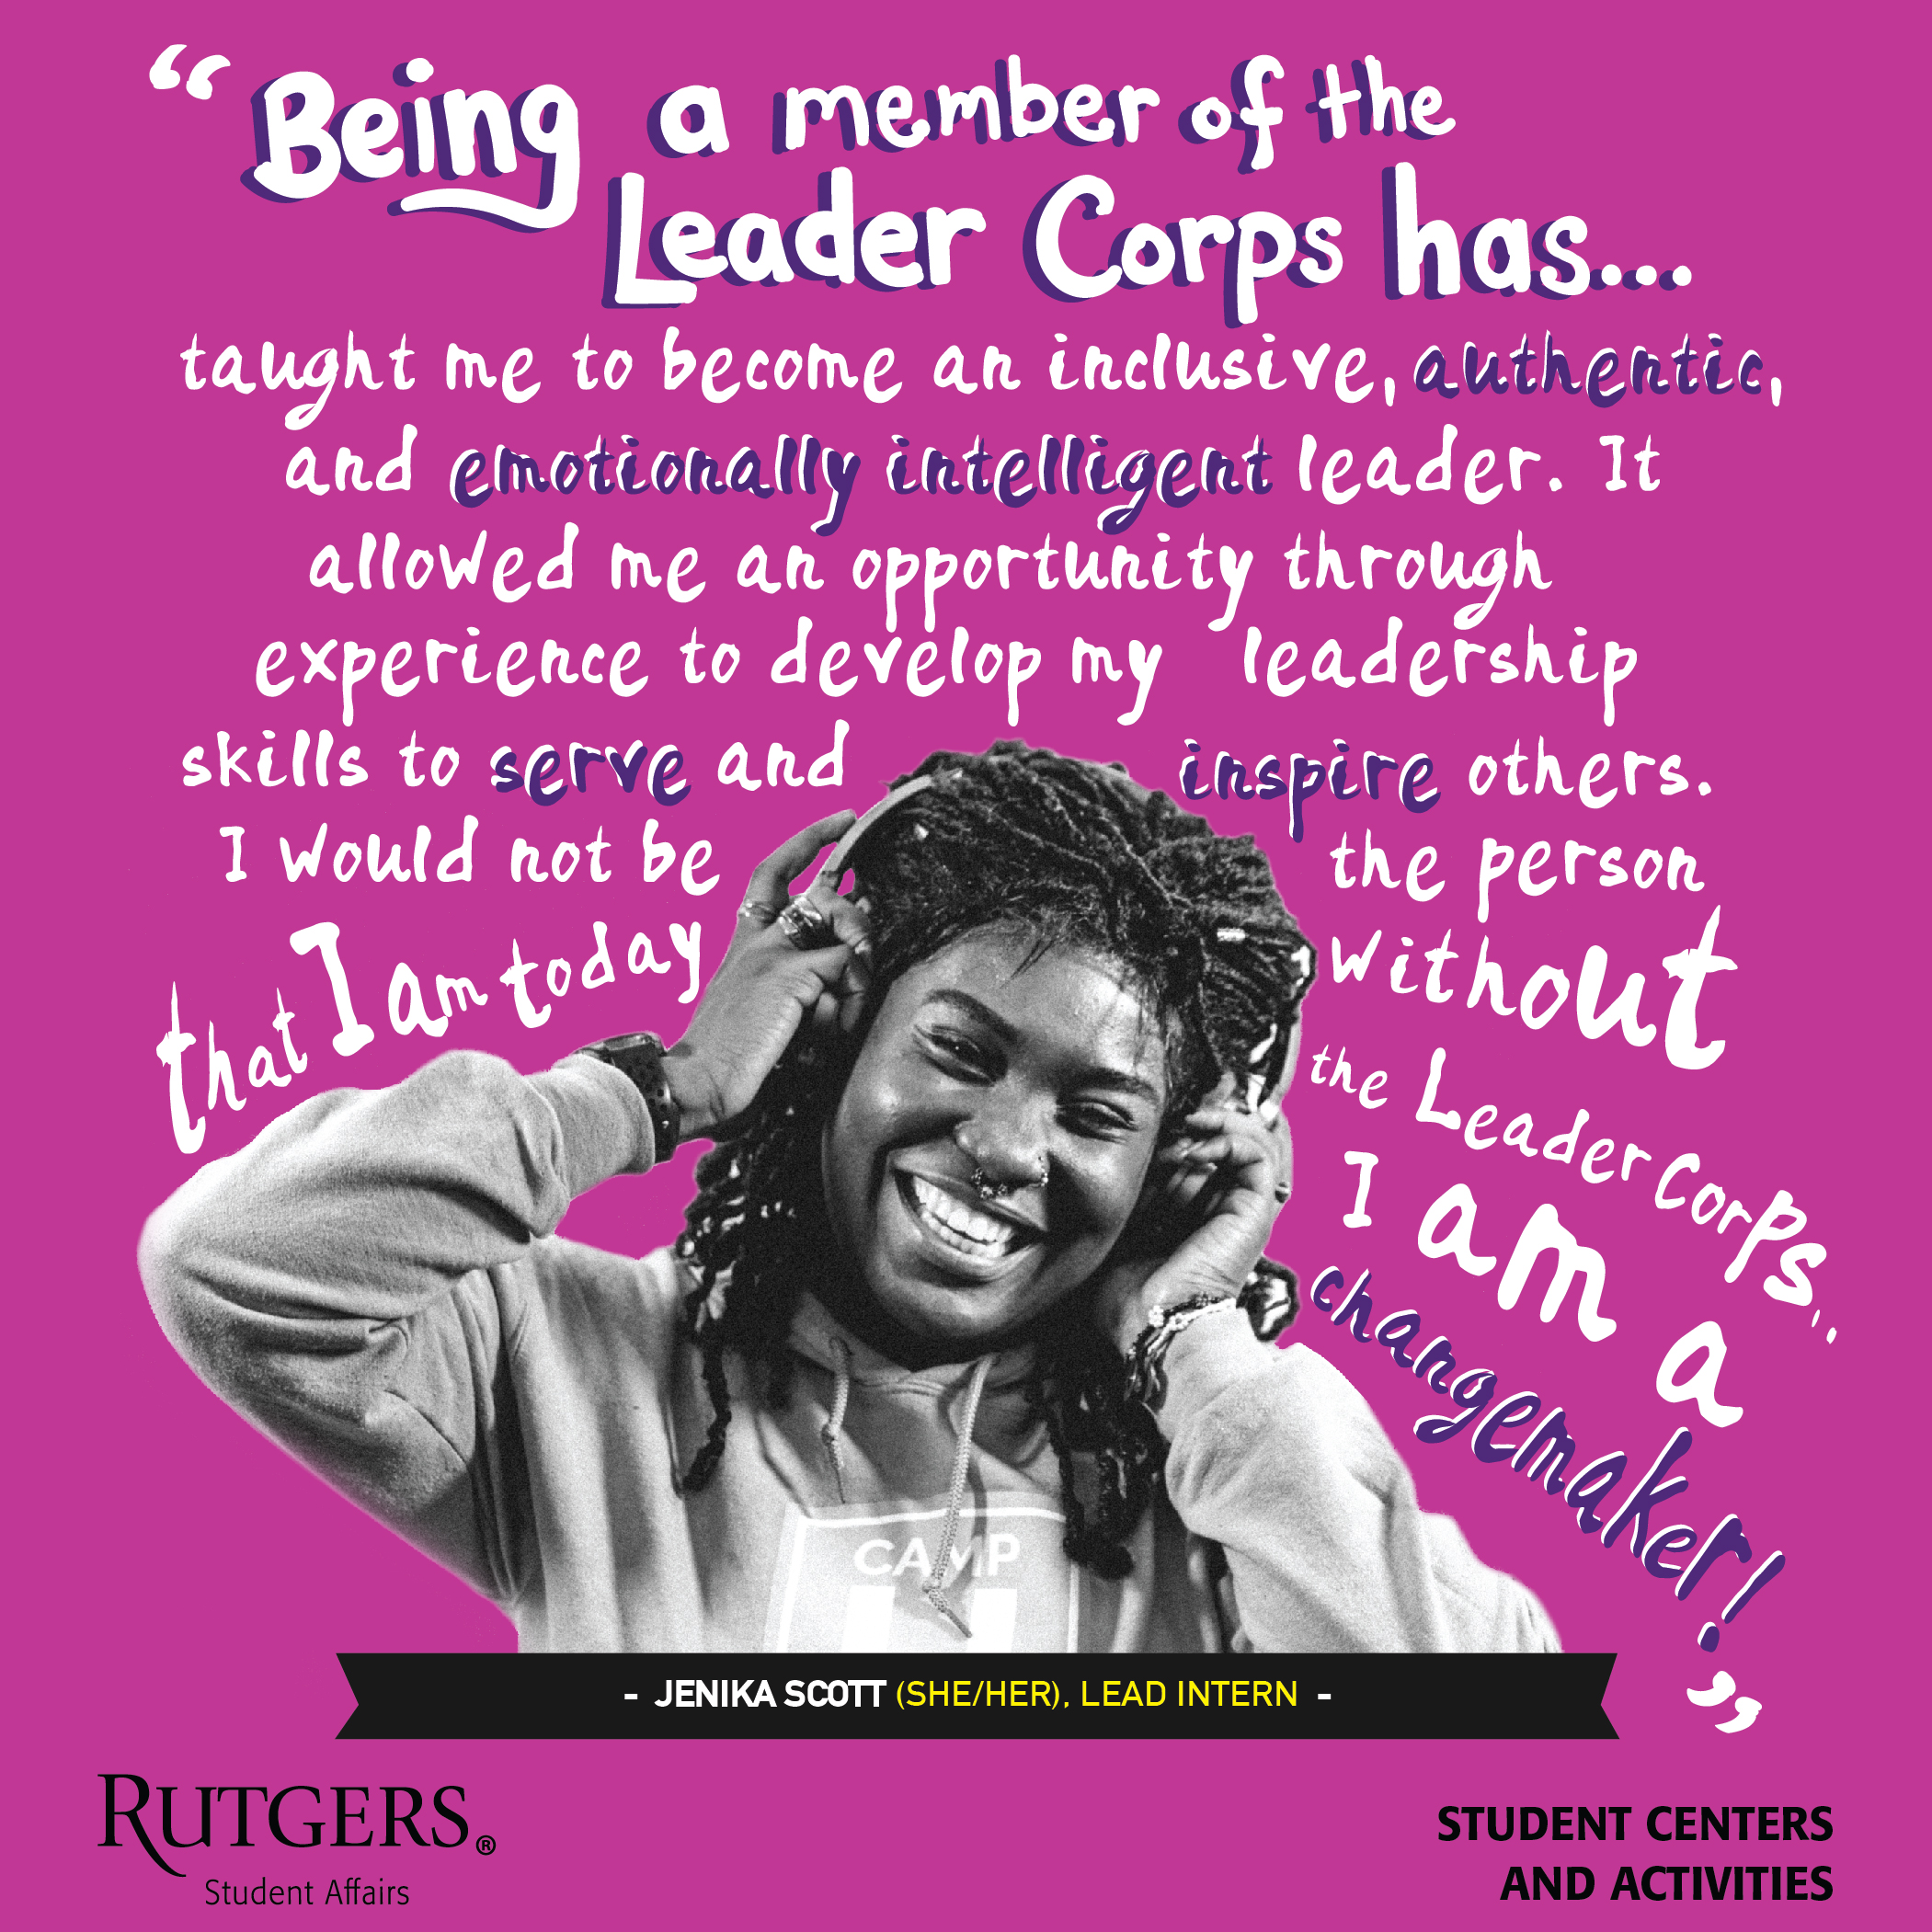 A quote by Jenika Scott: "Being a member of the Leader Corps has taught me to become an inclusive, authentic, and emotionally intelligent leader. It allowed me an opportunity through experience to develop my leadership skills to serve and inspire others. I would not be the person that I am today without the Leader Corps. I am a change maker!"